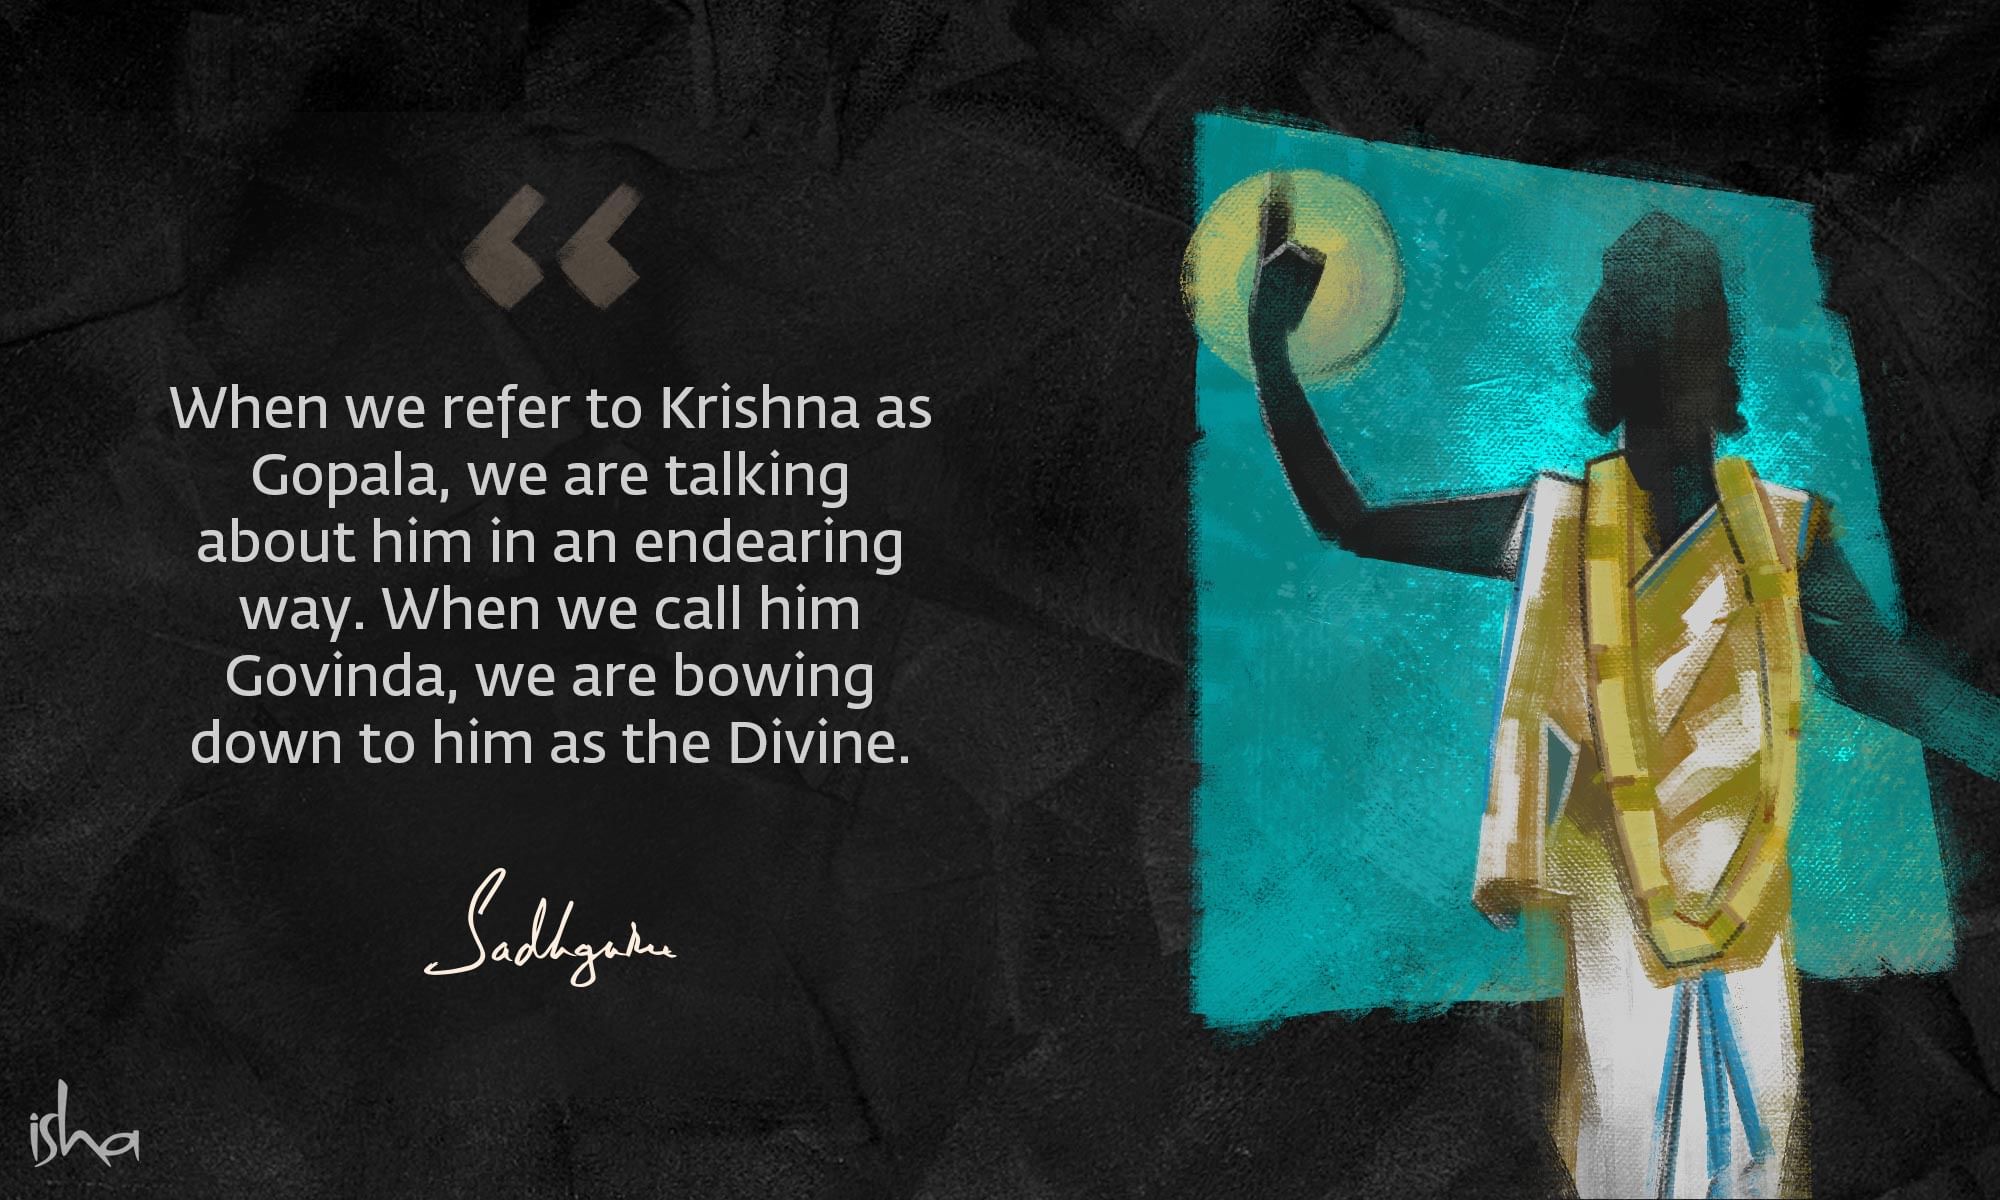 Krishna quote from Sadhguru with abstract Krishna standing. A halo is around his raised hand.